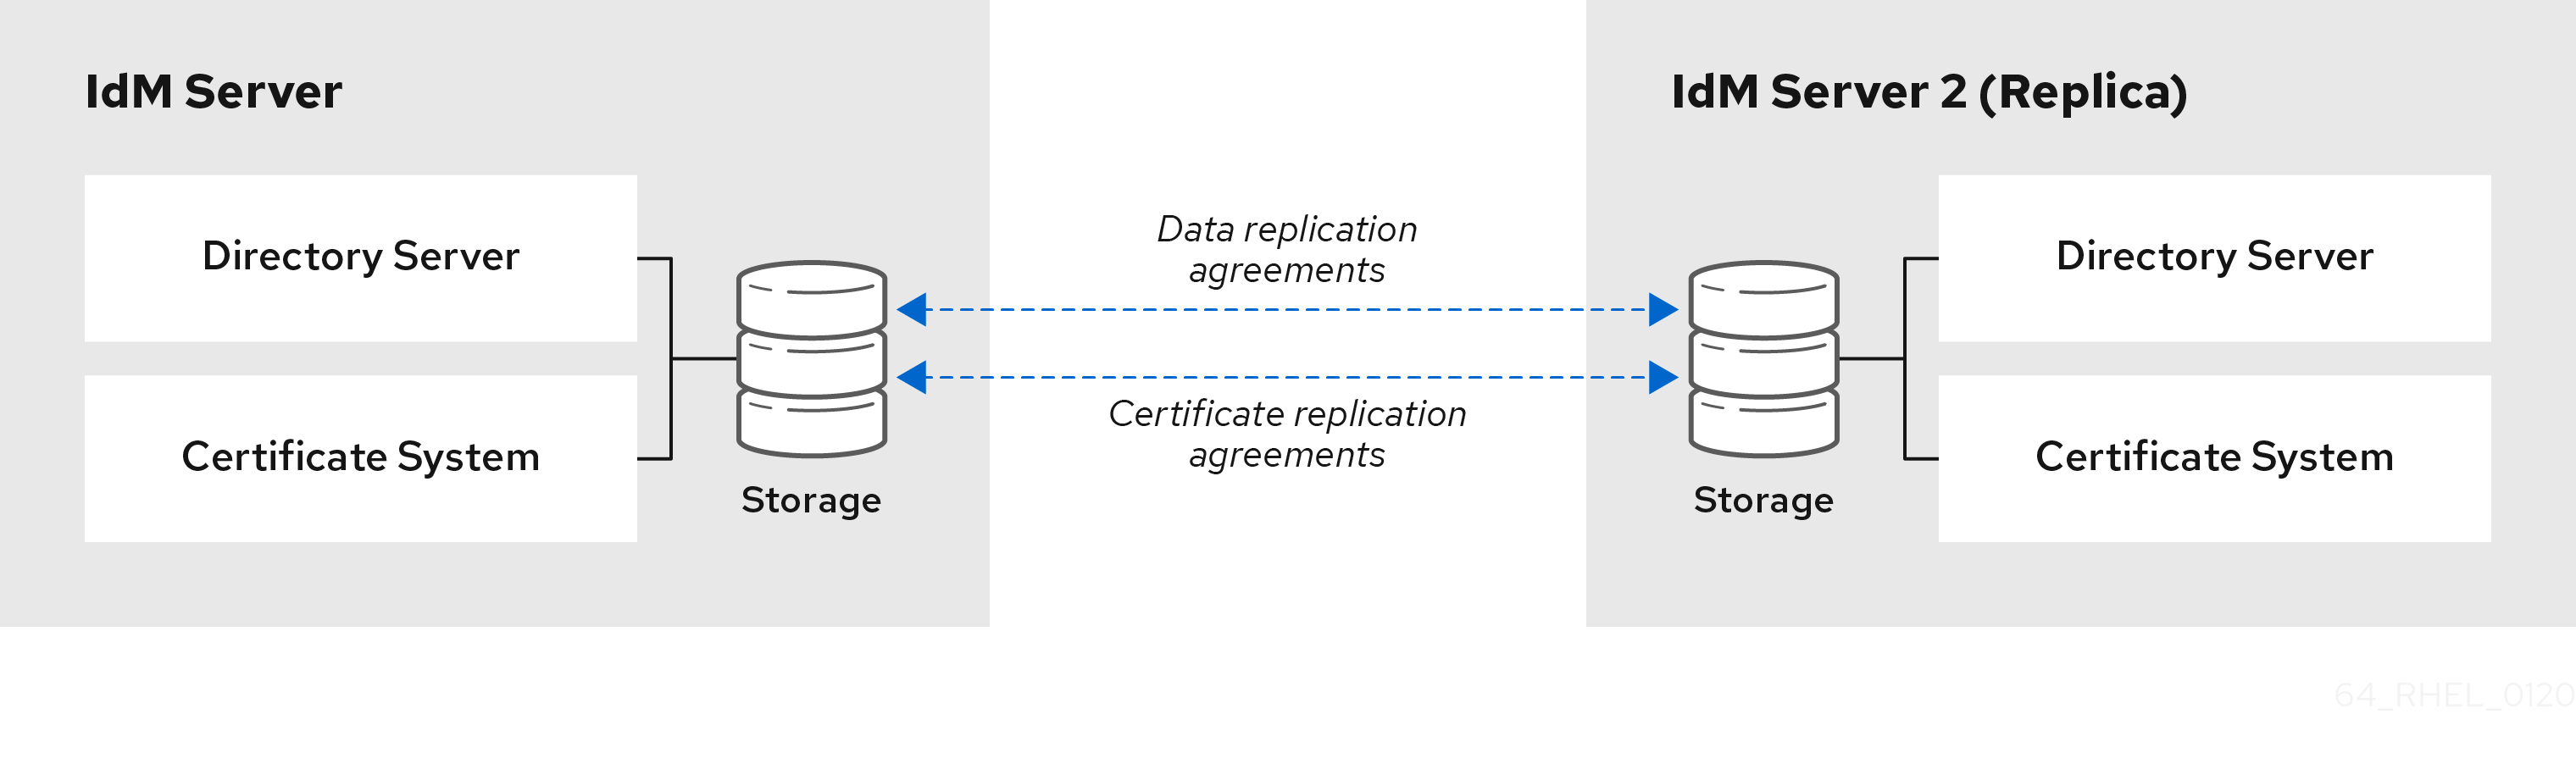 An image of two servers with two sets of replication agreements between them: a data replication agreement that pertains to their Directory Server database and a certificate replication agreement that pertains to their Certificate System data